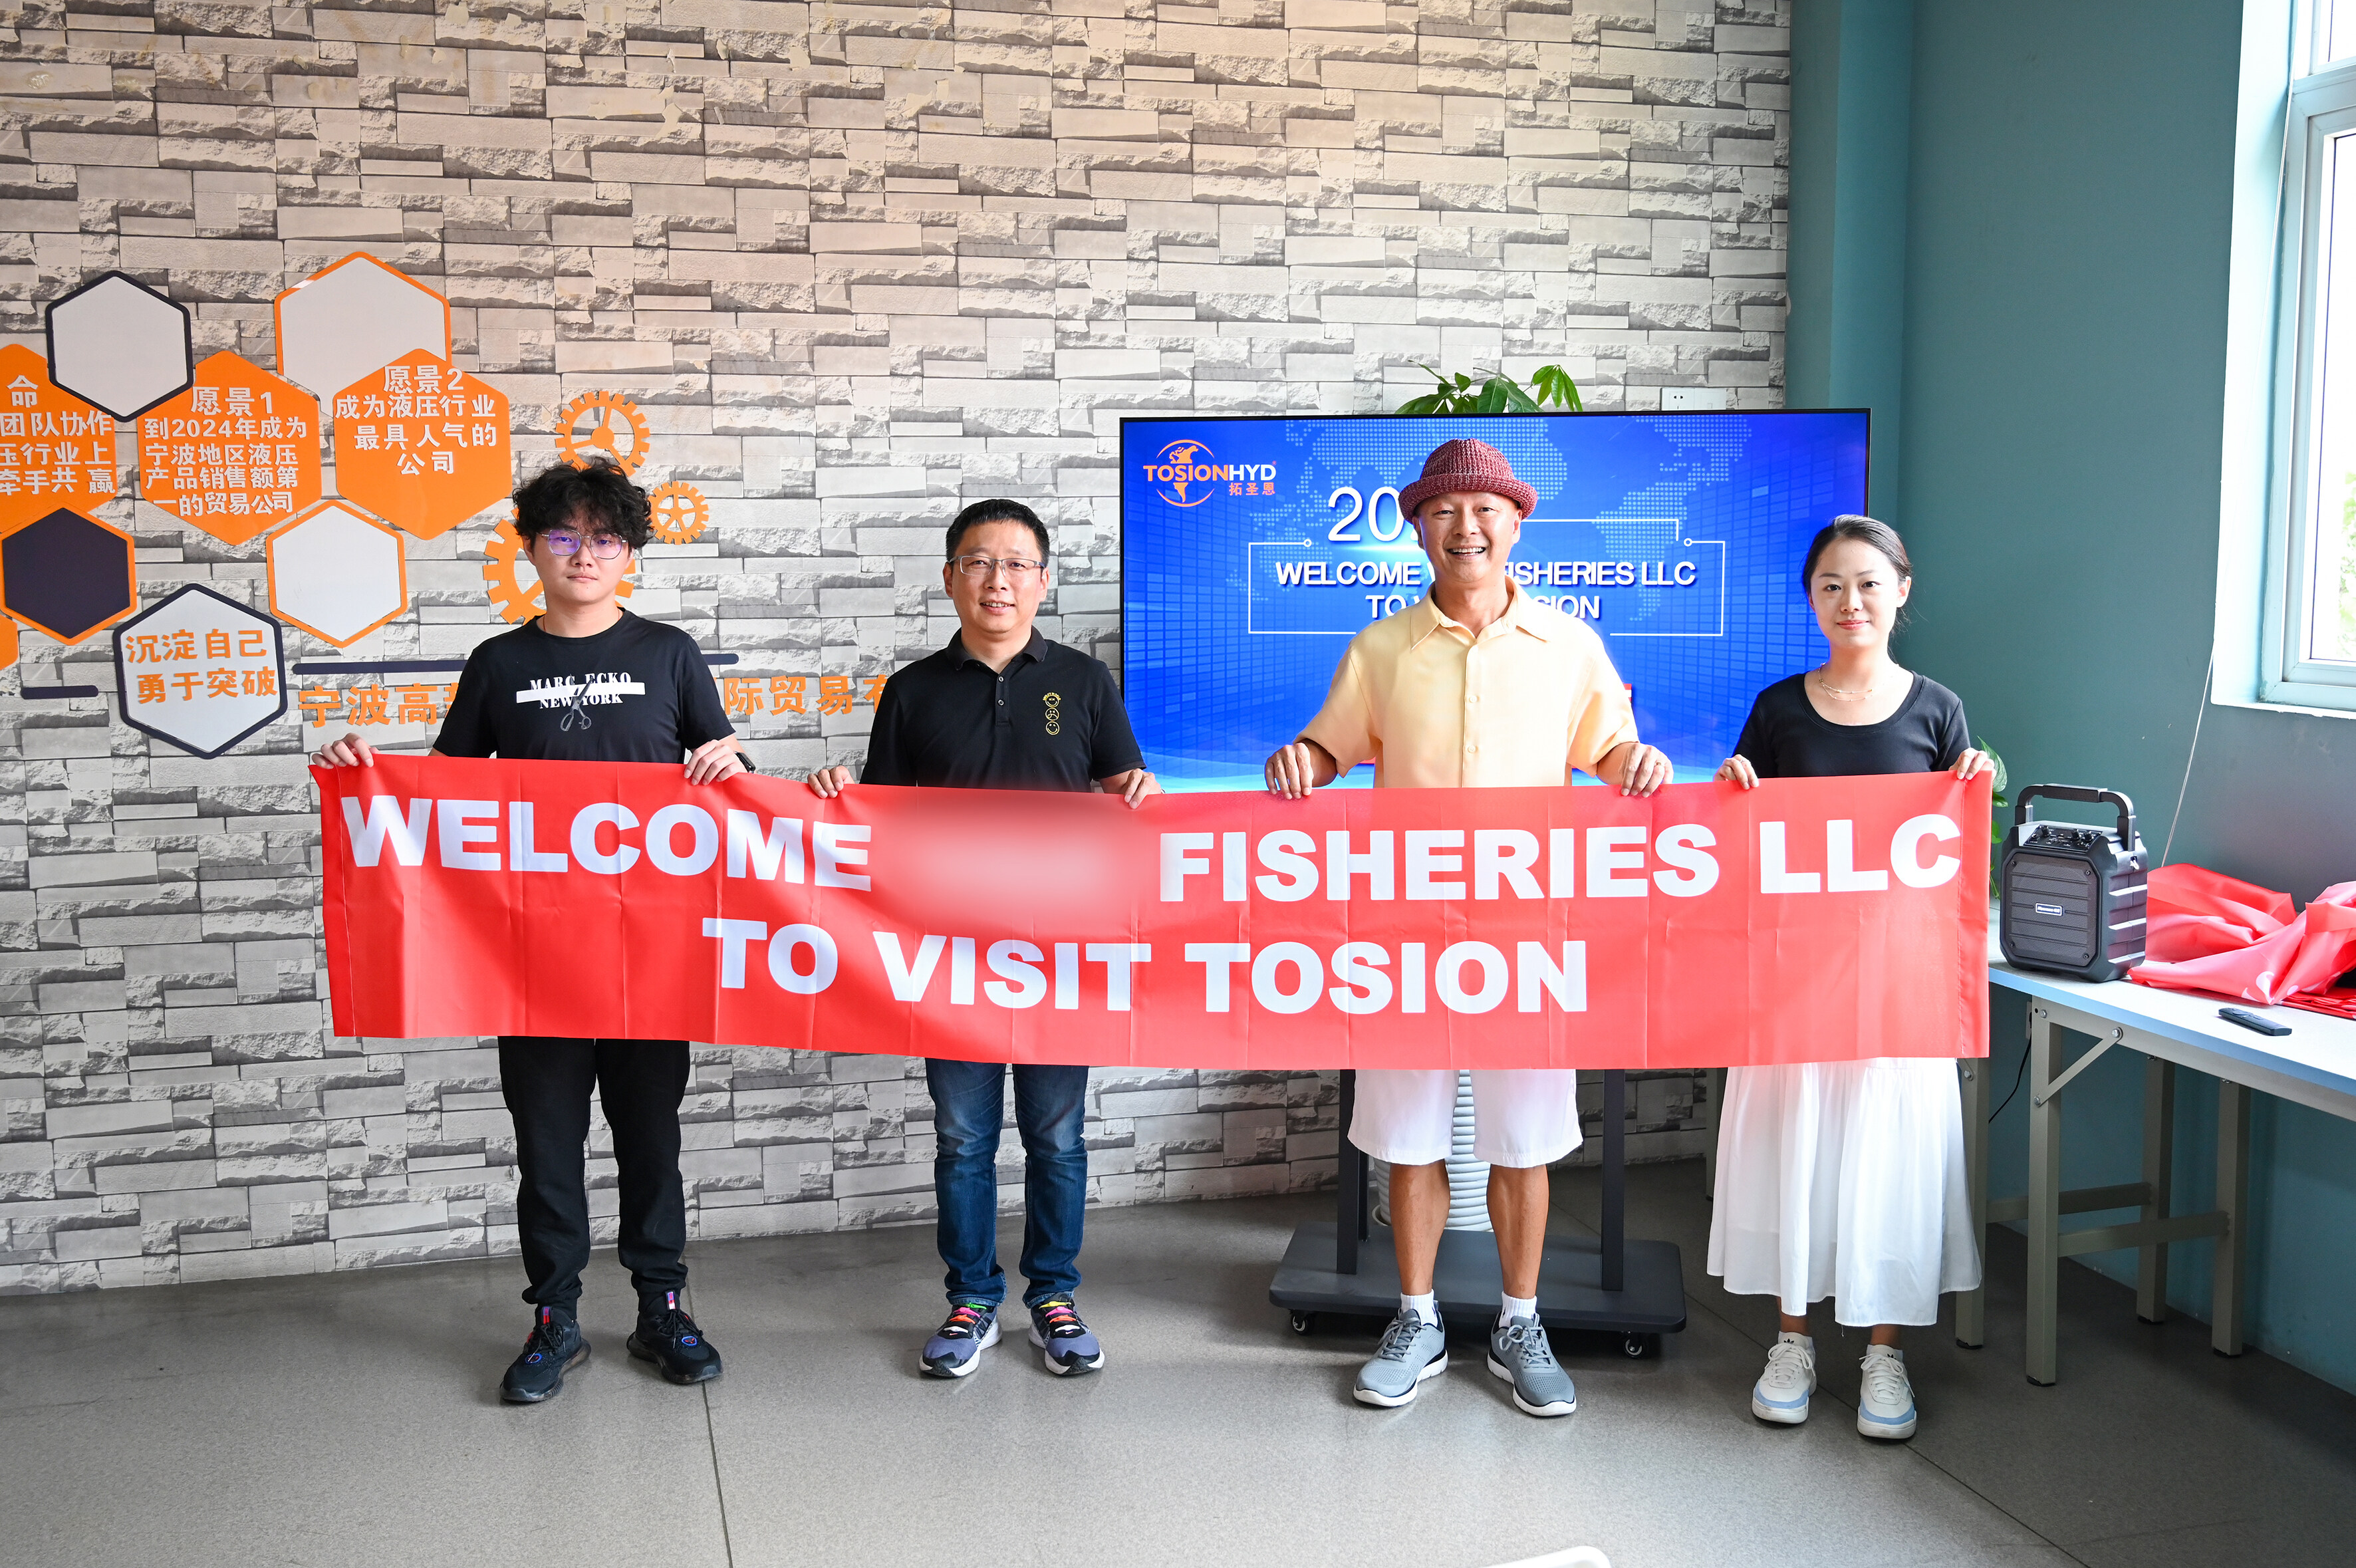 Welcome customers to visit TOSION